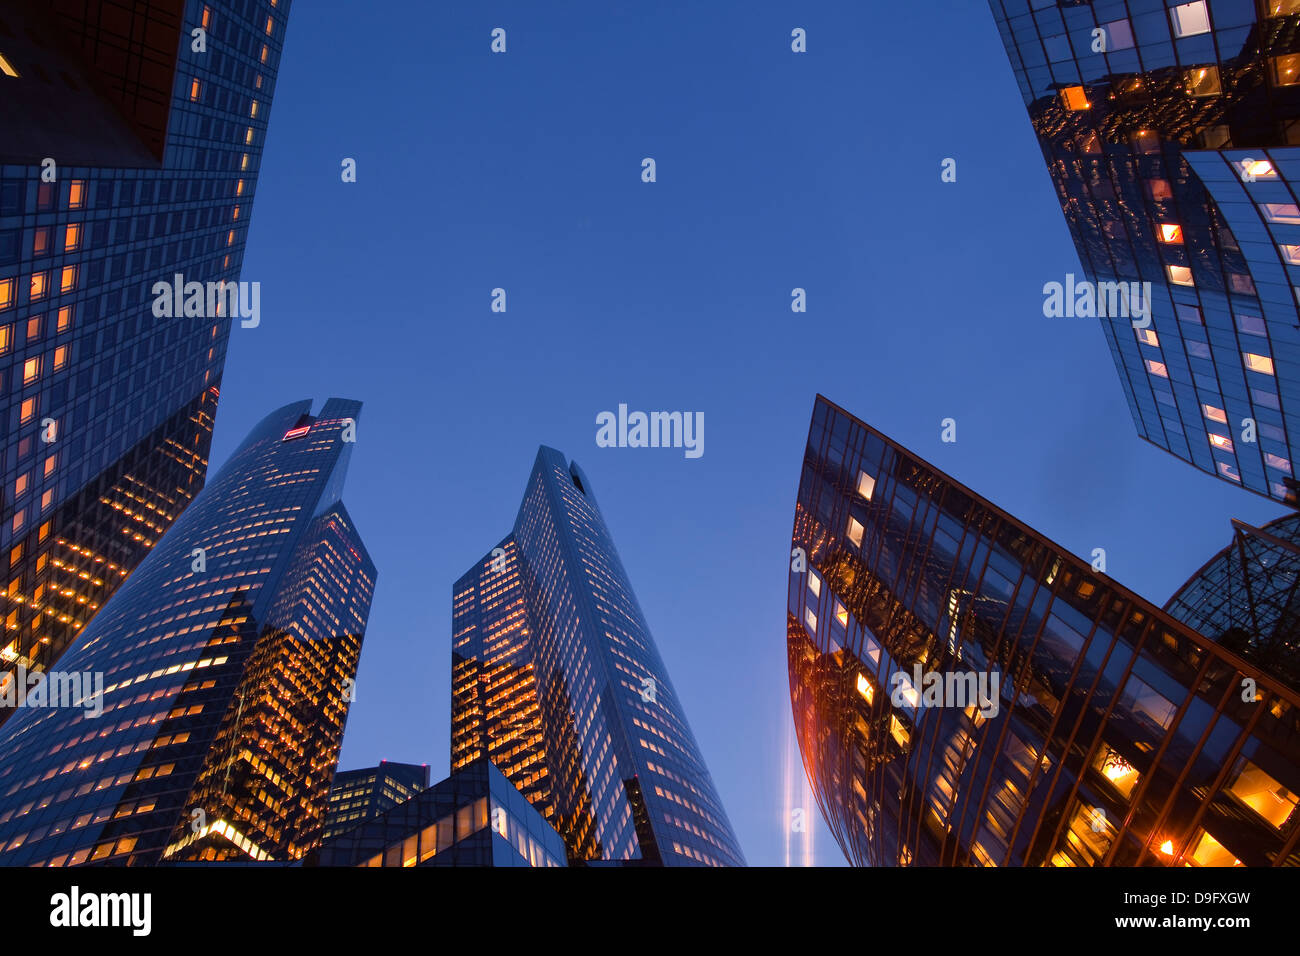 High rise office buildings in the La Defense area of Paris, France Stock Photo